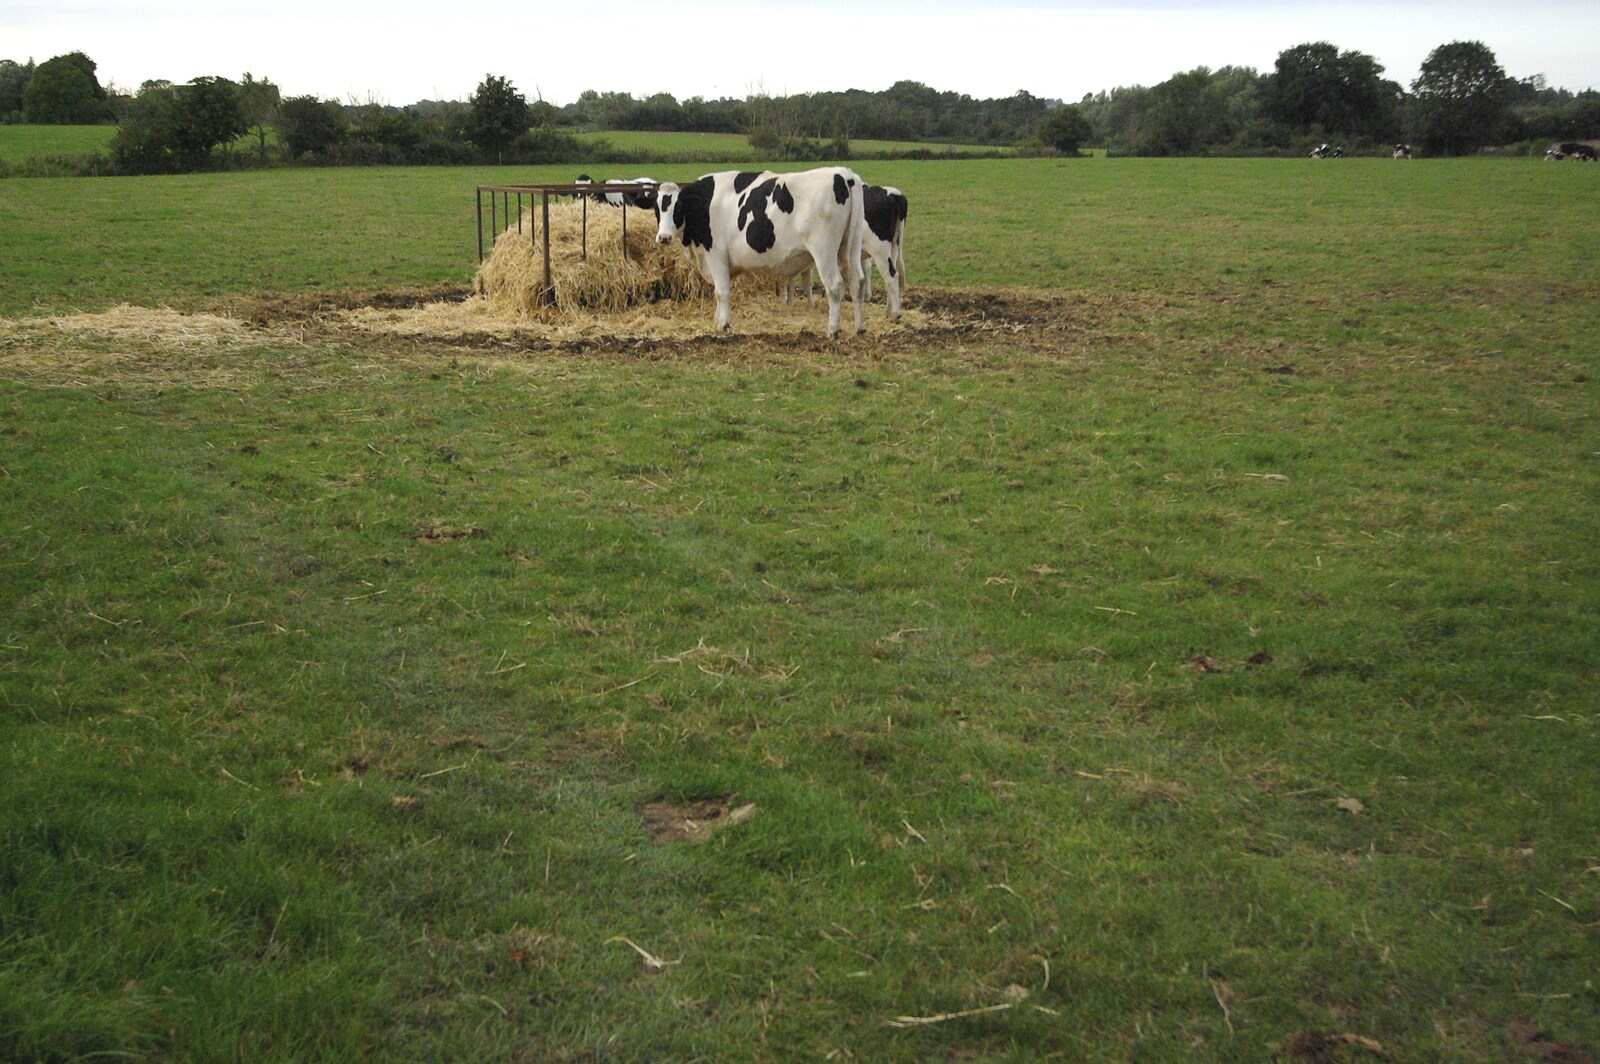 A Picnic on The Ling, Wortham, Suffolk - 26th August 2007: Some cows look over